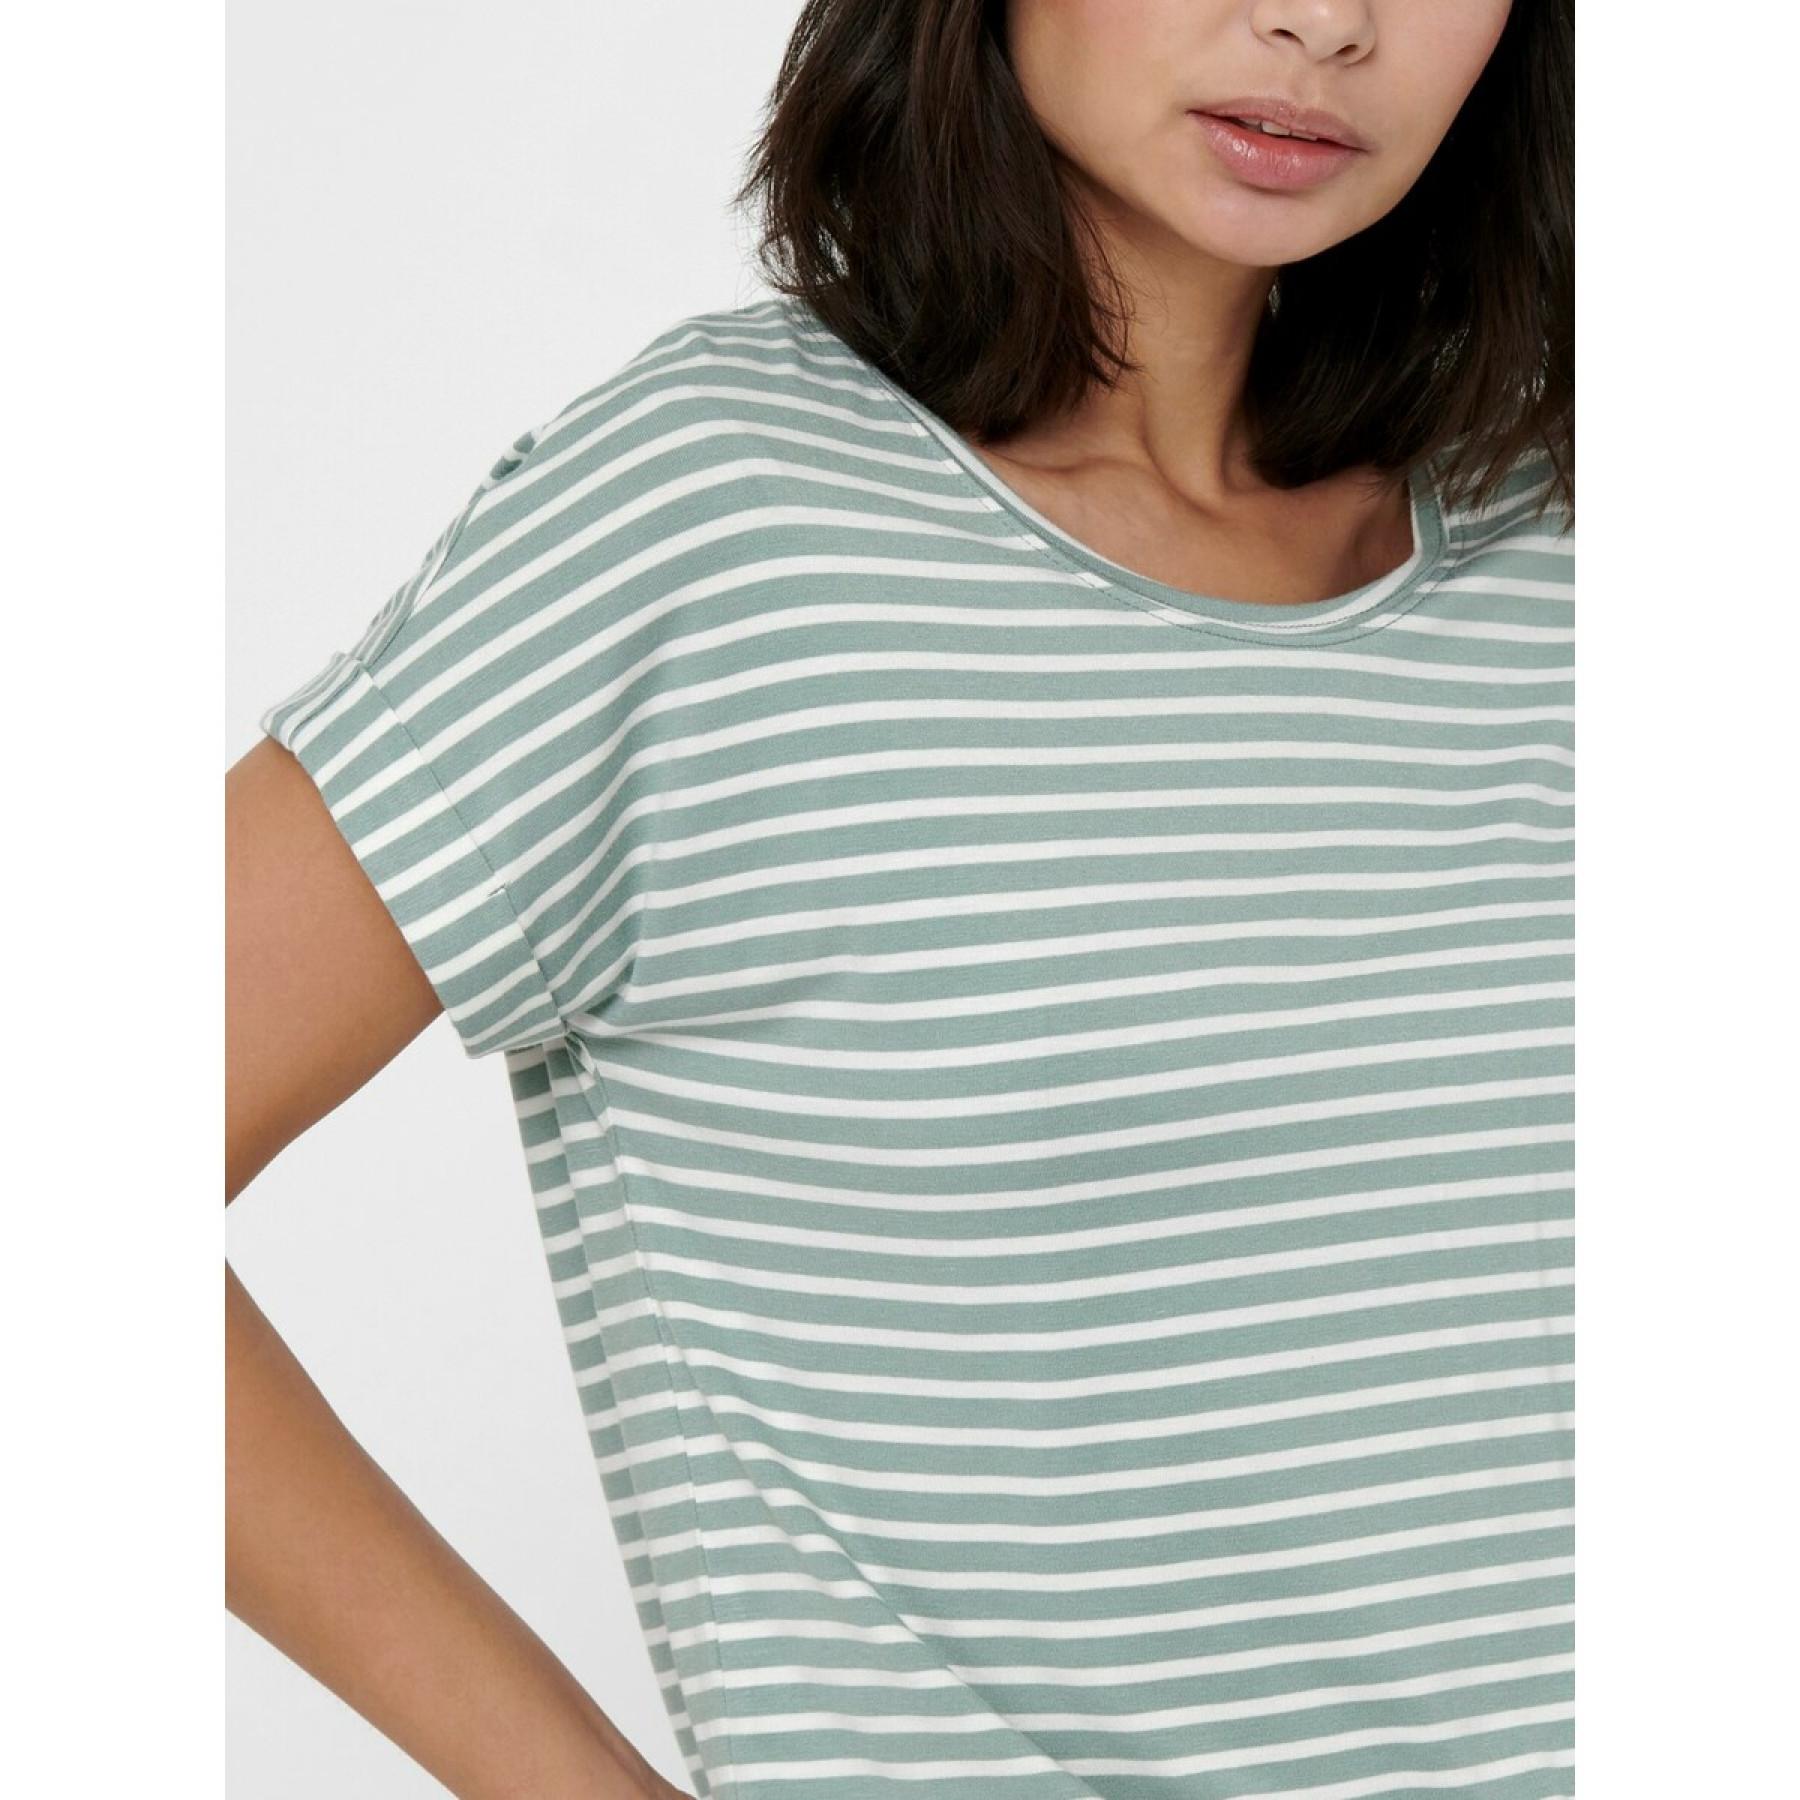 T-shirt femme Only Moster stripe col rond